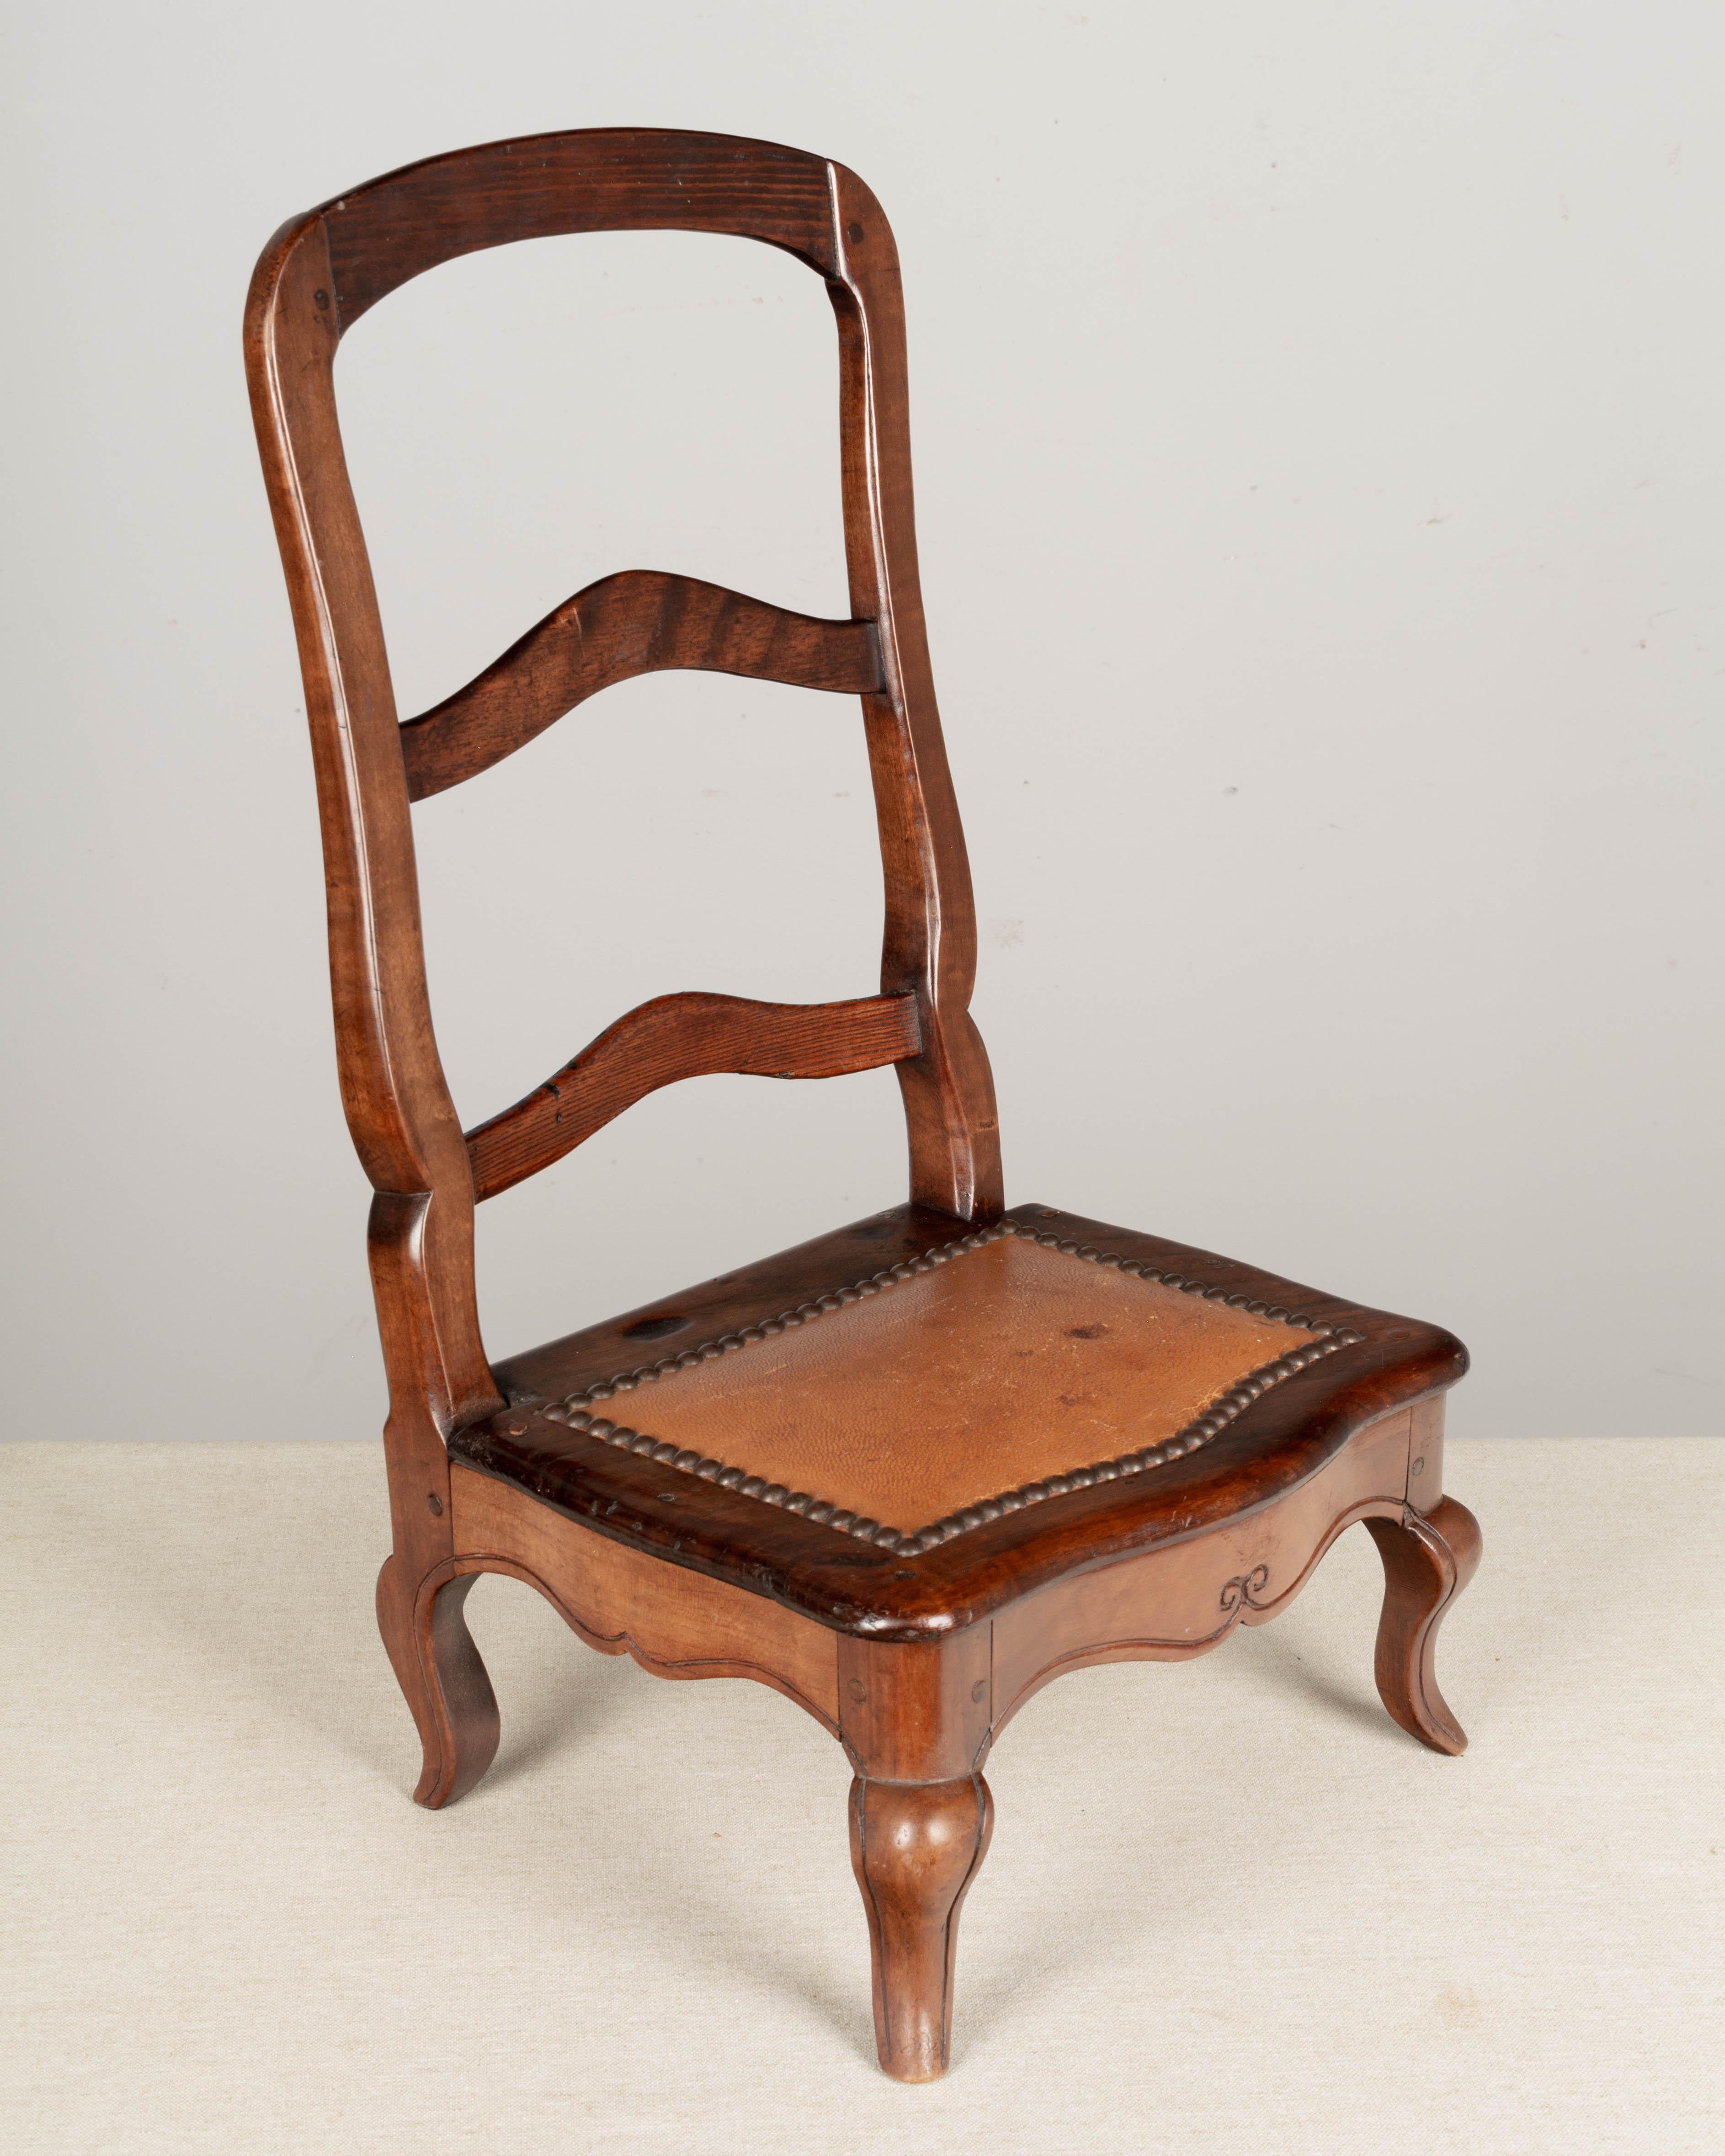 A 19th century Louis XV style Country French mahogany small sampler chair, hand-crafted by the furniture maker as an example of the style of chair that may be ordered. Ladder back with cabriole legs and leather seat with nail head trim. Pegged